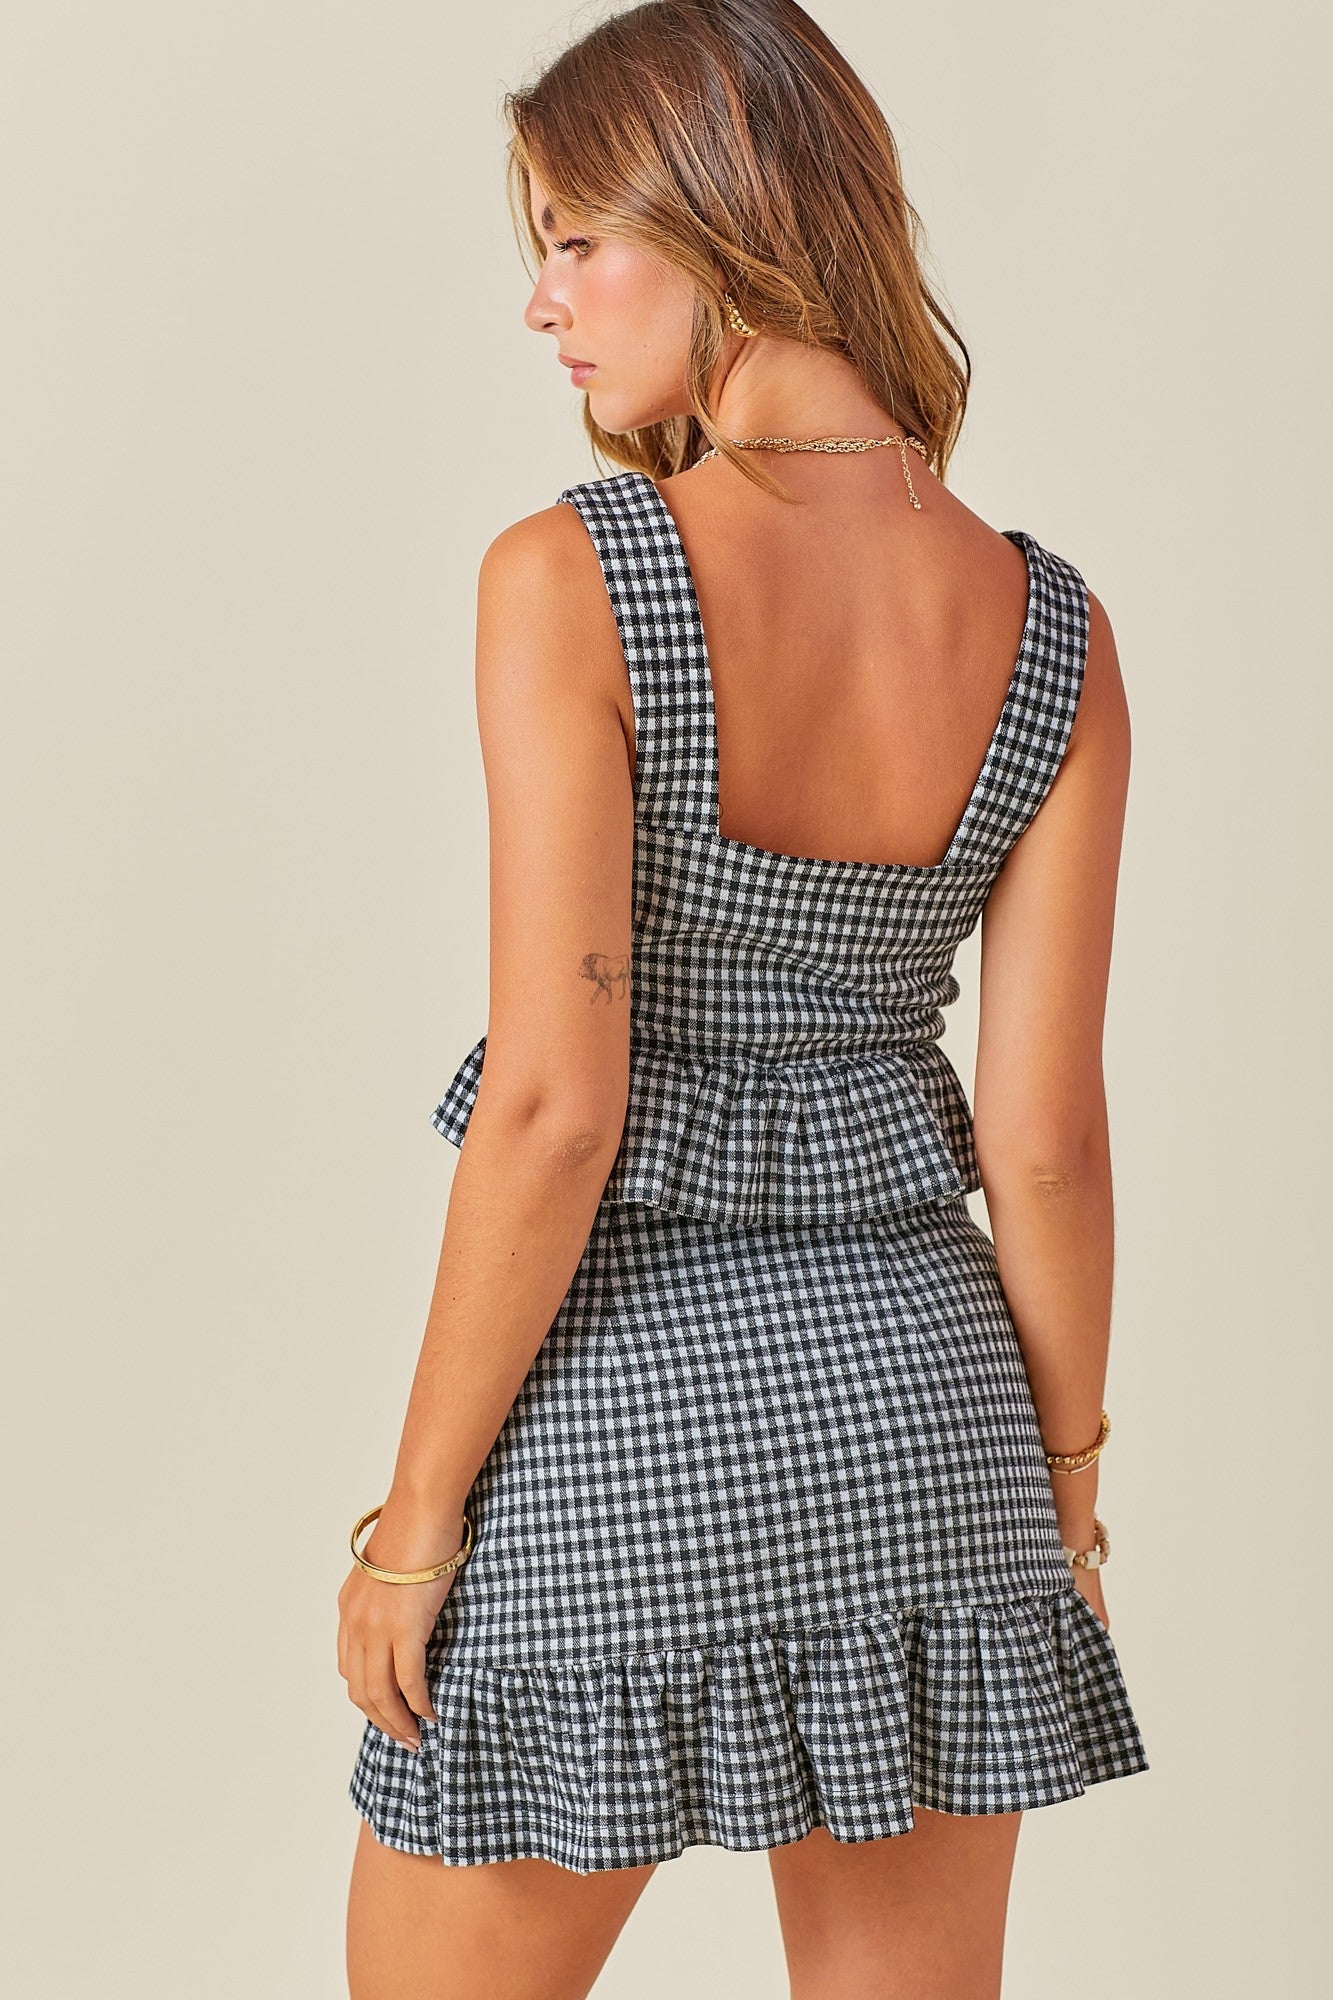 Gingham Peplum Square Neck Cropped Top - Frock Shop